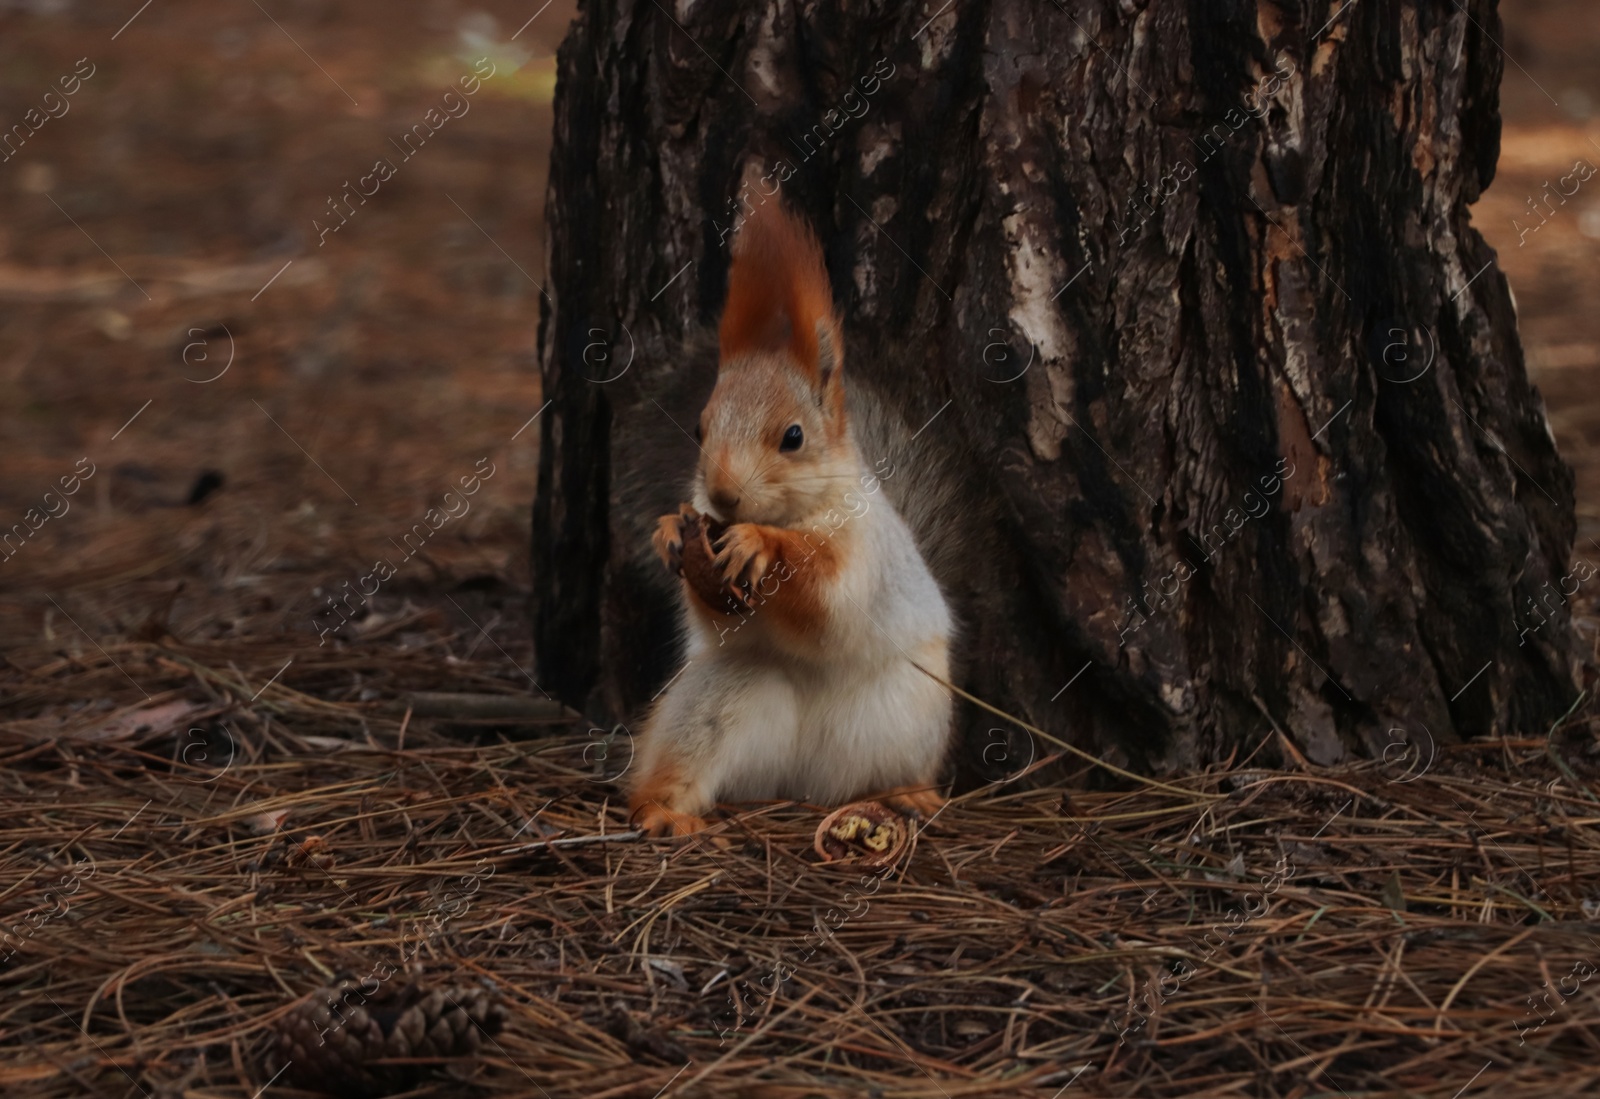 Photo of Cute red squirrel eating walnut near tree in forest